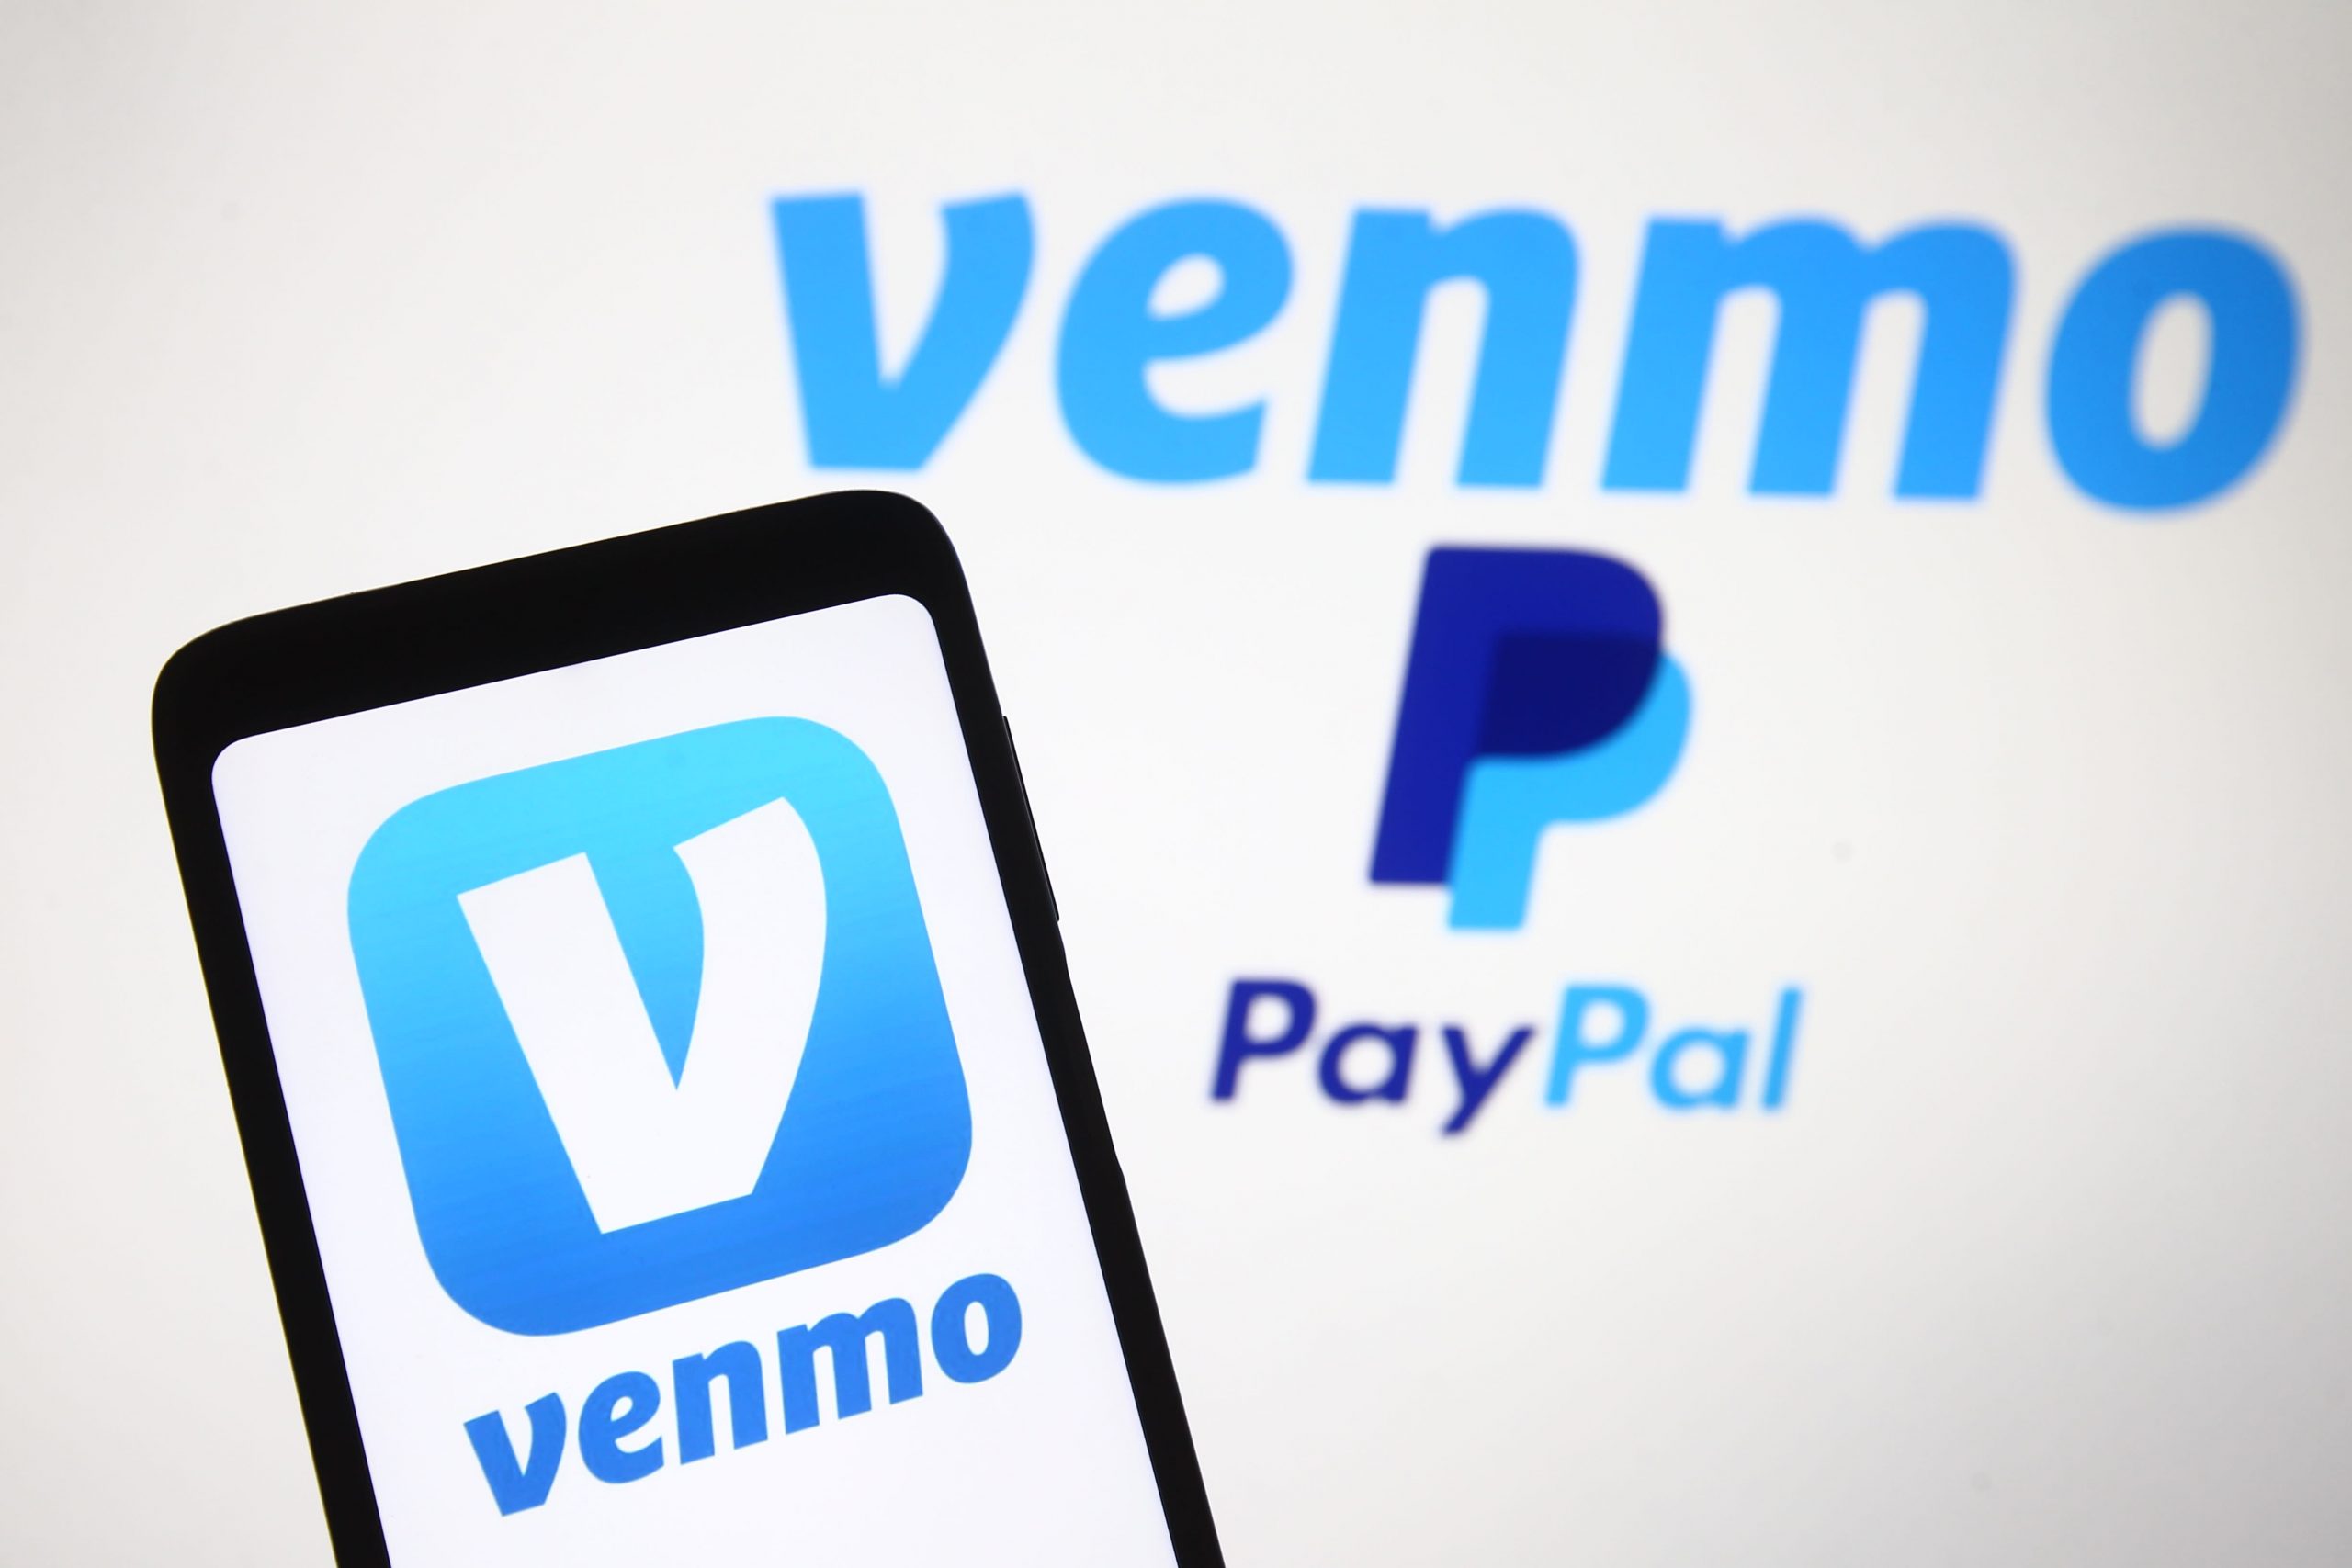 Venmo users can now buy and sell bitcoin and other cryptocurrencies